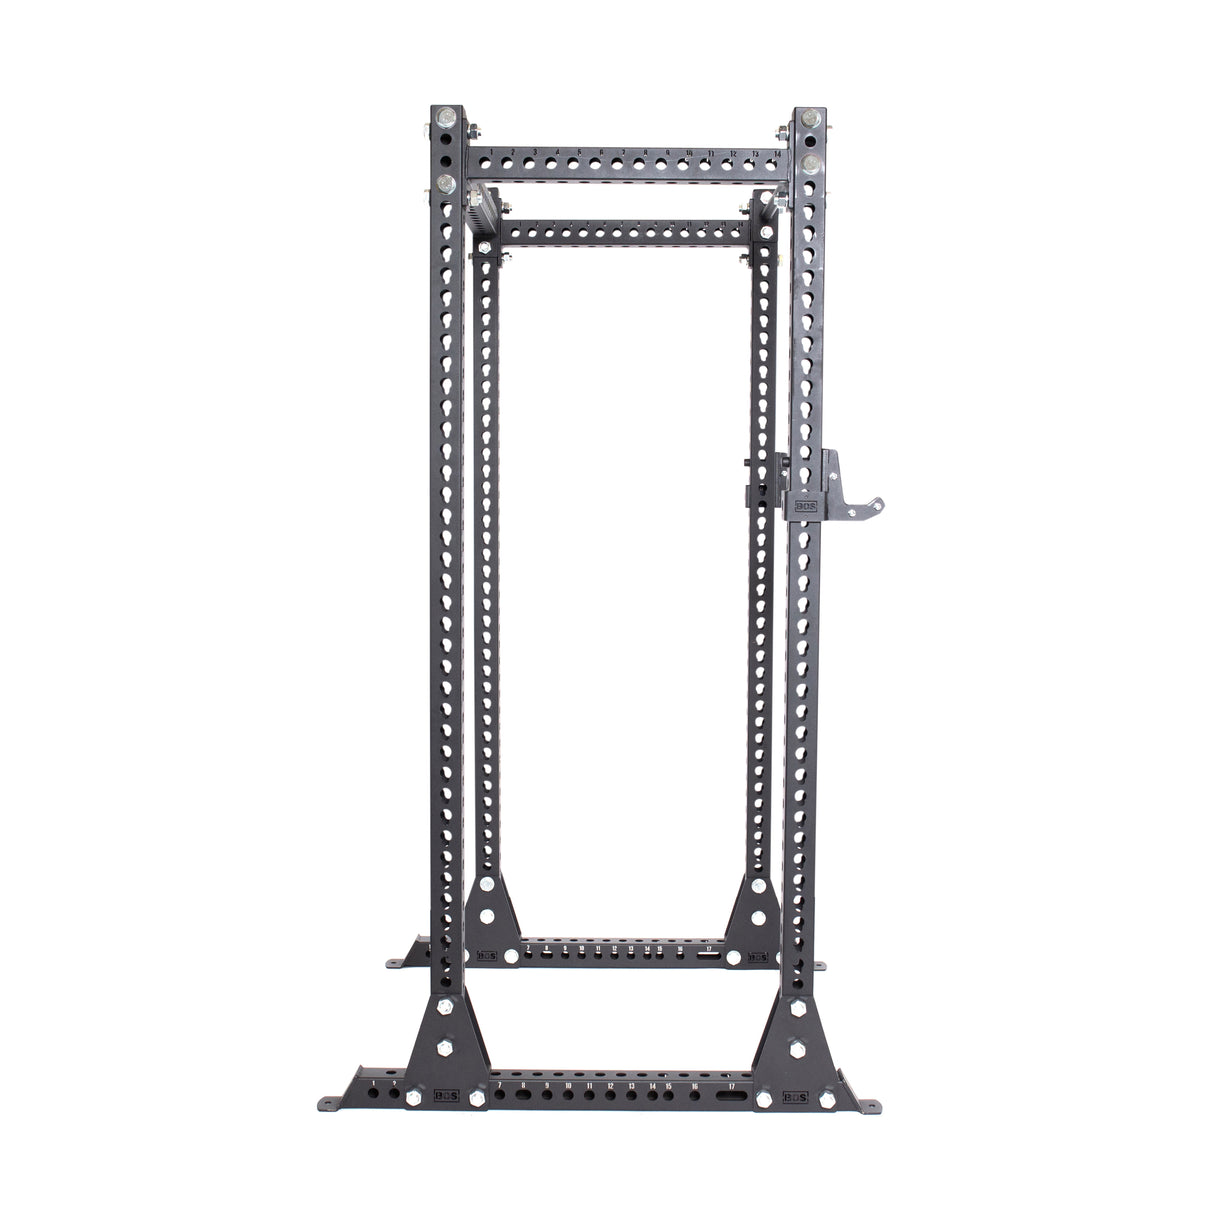 product picture of Manticore Flat Foot Power Rack PREBUILT side view